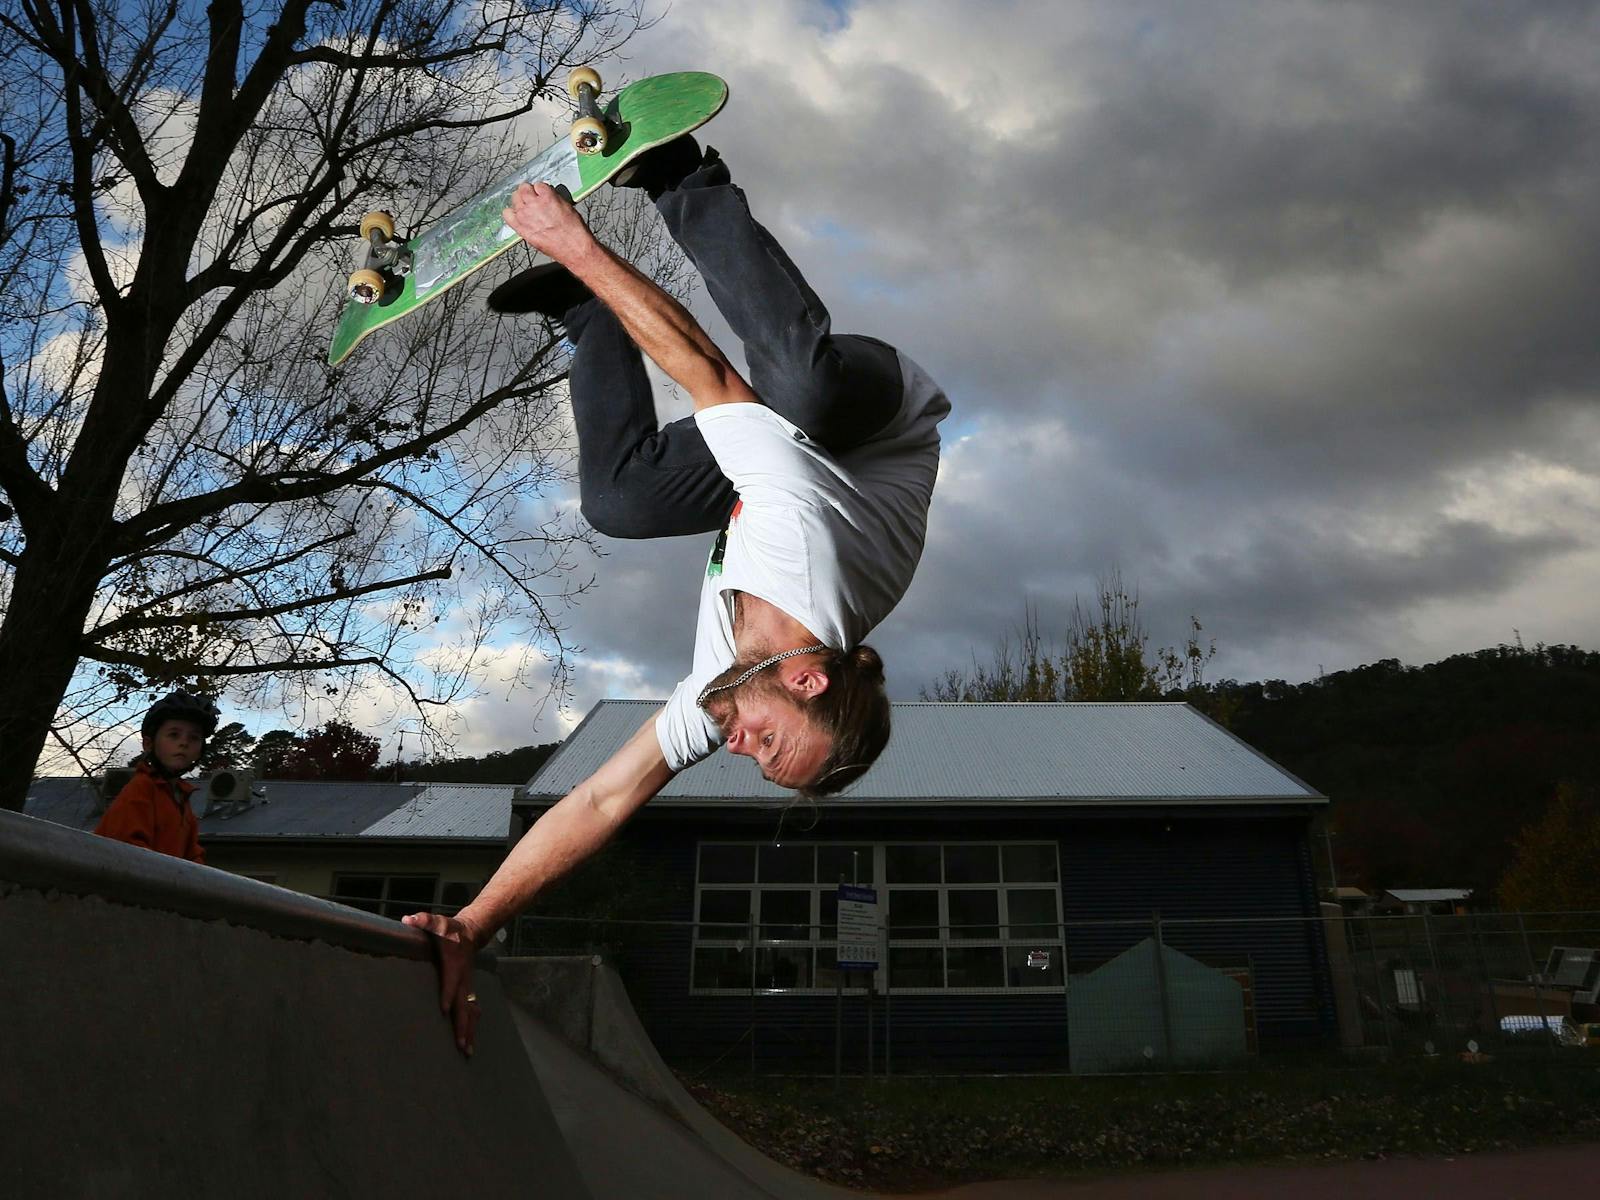 Image for North East Skate Park Series - Round Seven, Bright